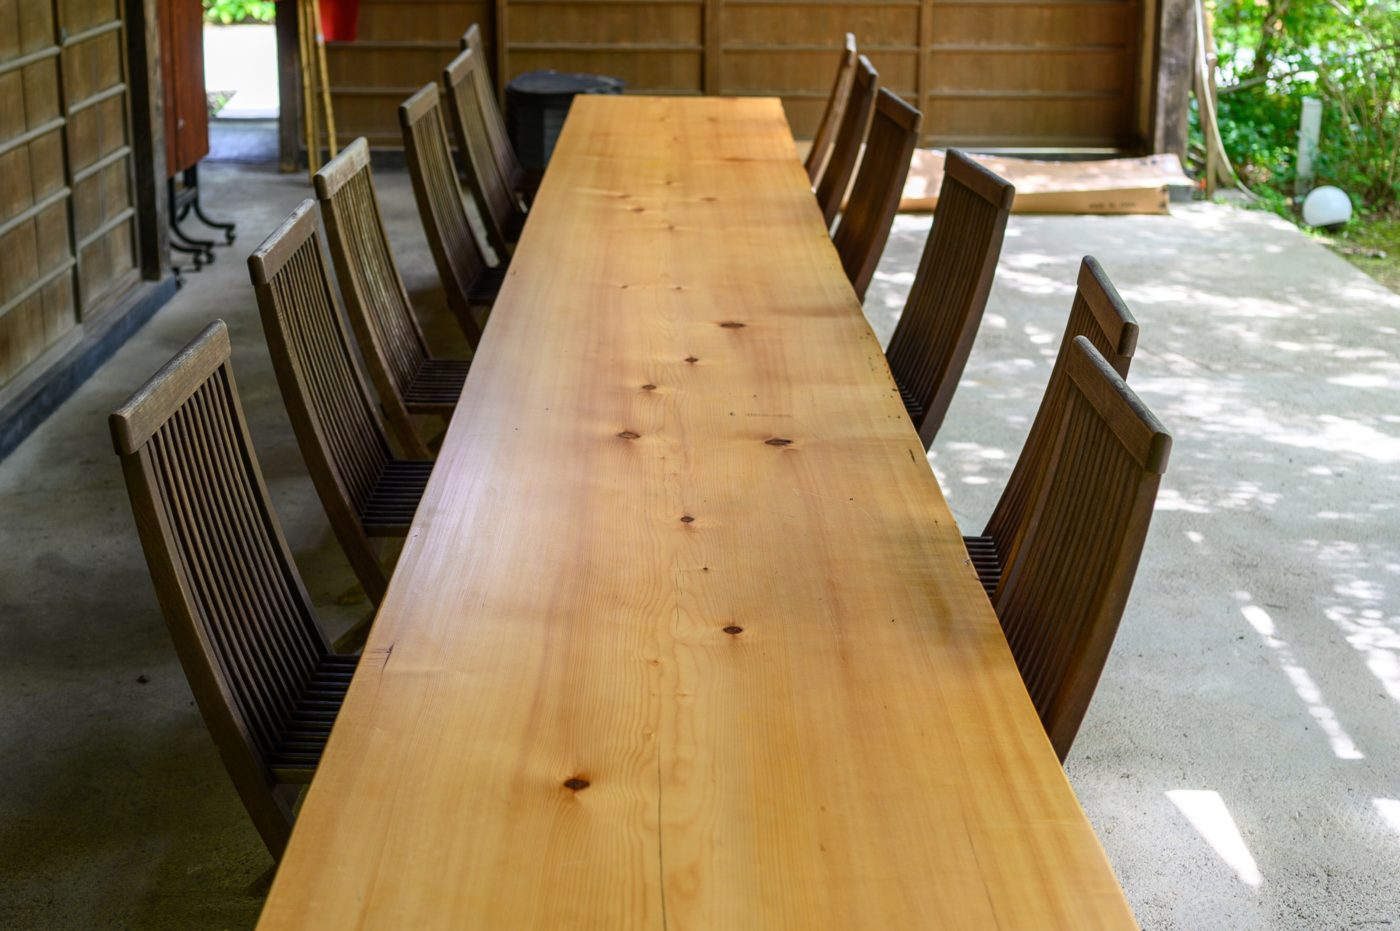 how to update an old dining room set wood table